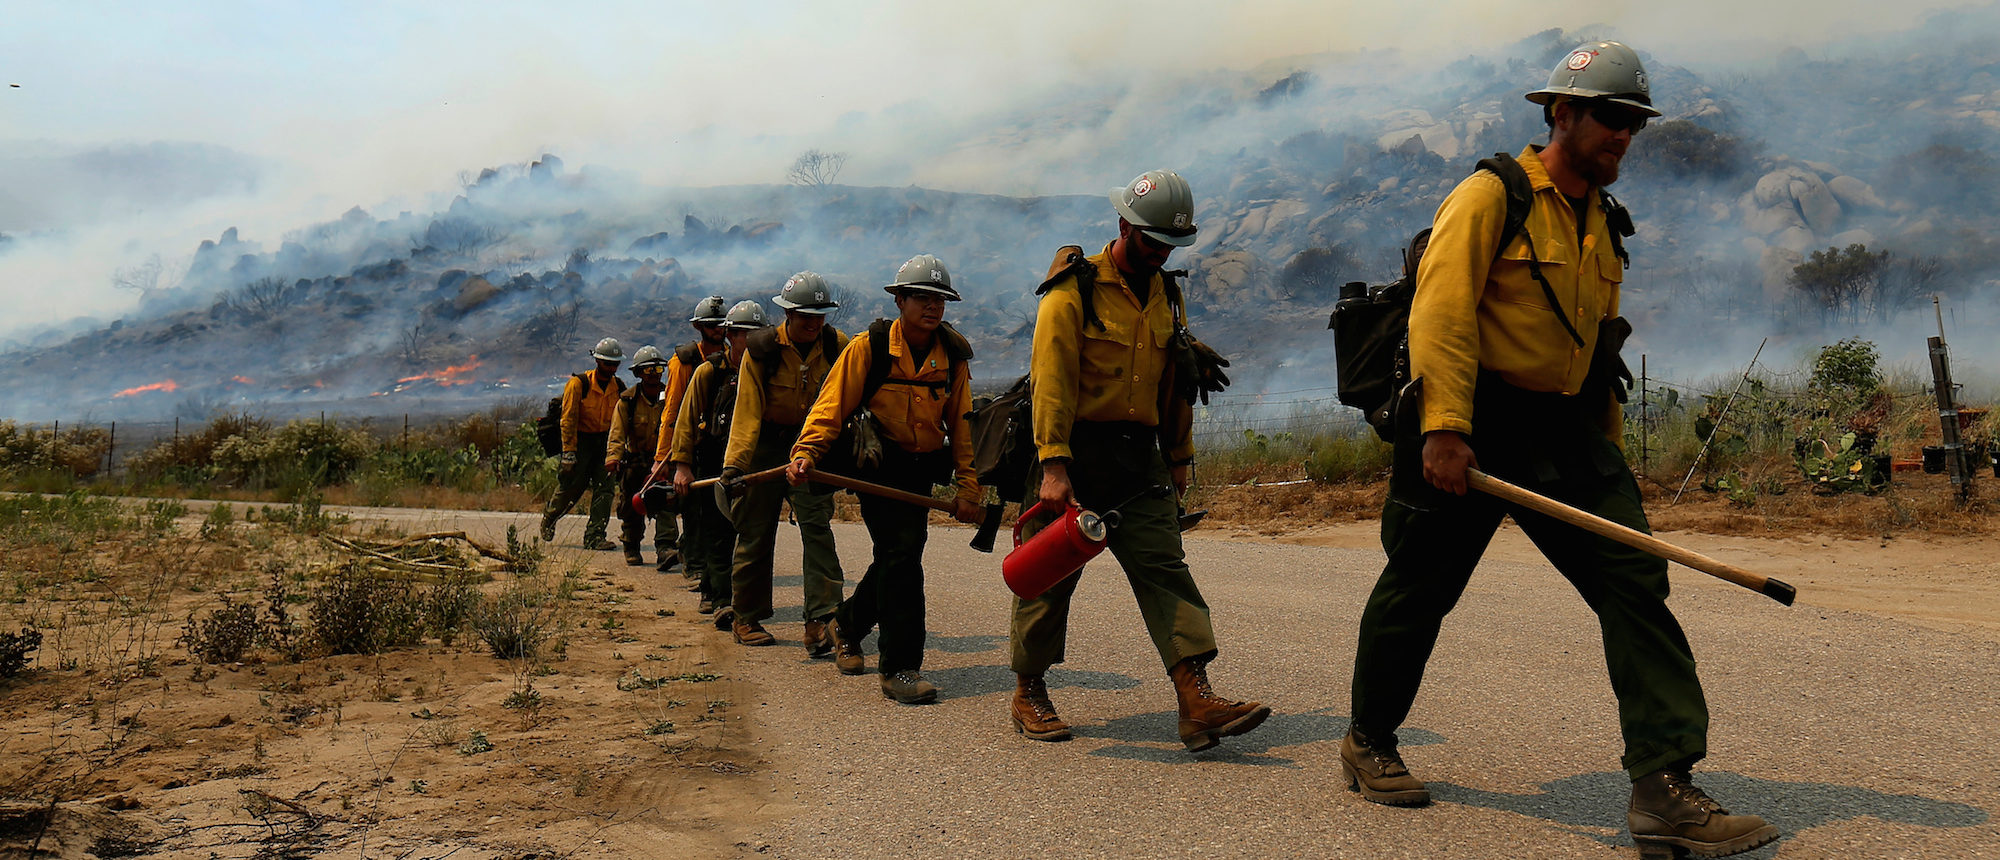 U.S. Forest Service firefighters walk to their truck after battling a wildfire near Potrero California, June 20, 2016. REUTERS/Mike Blake